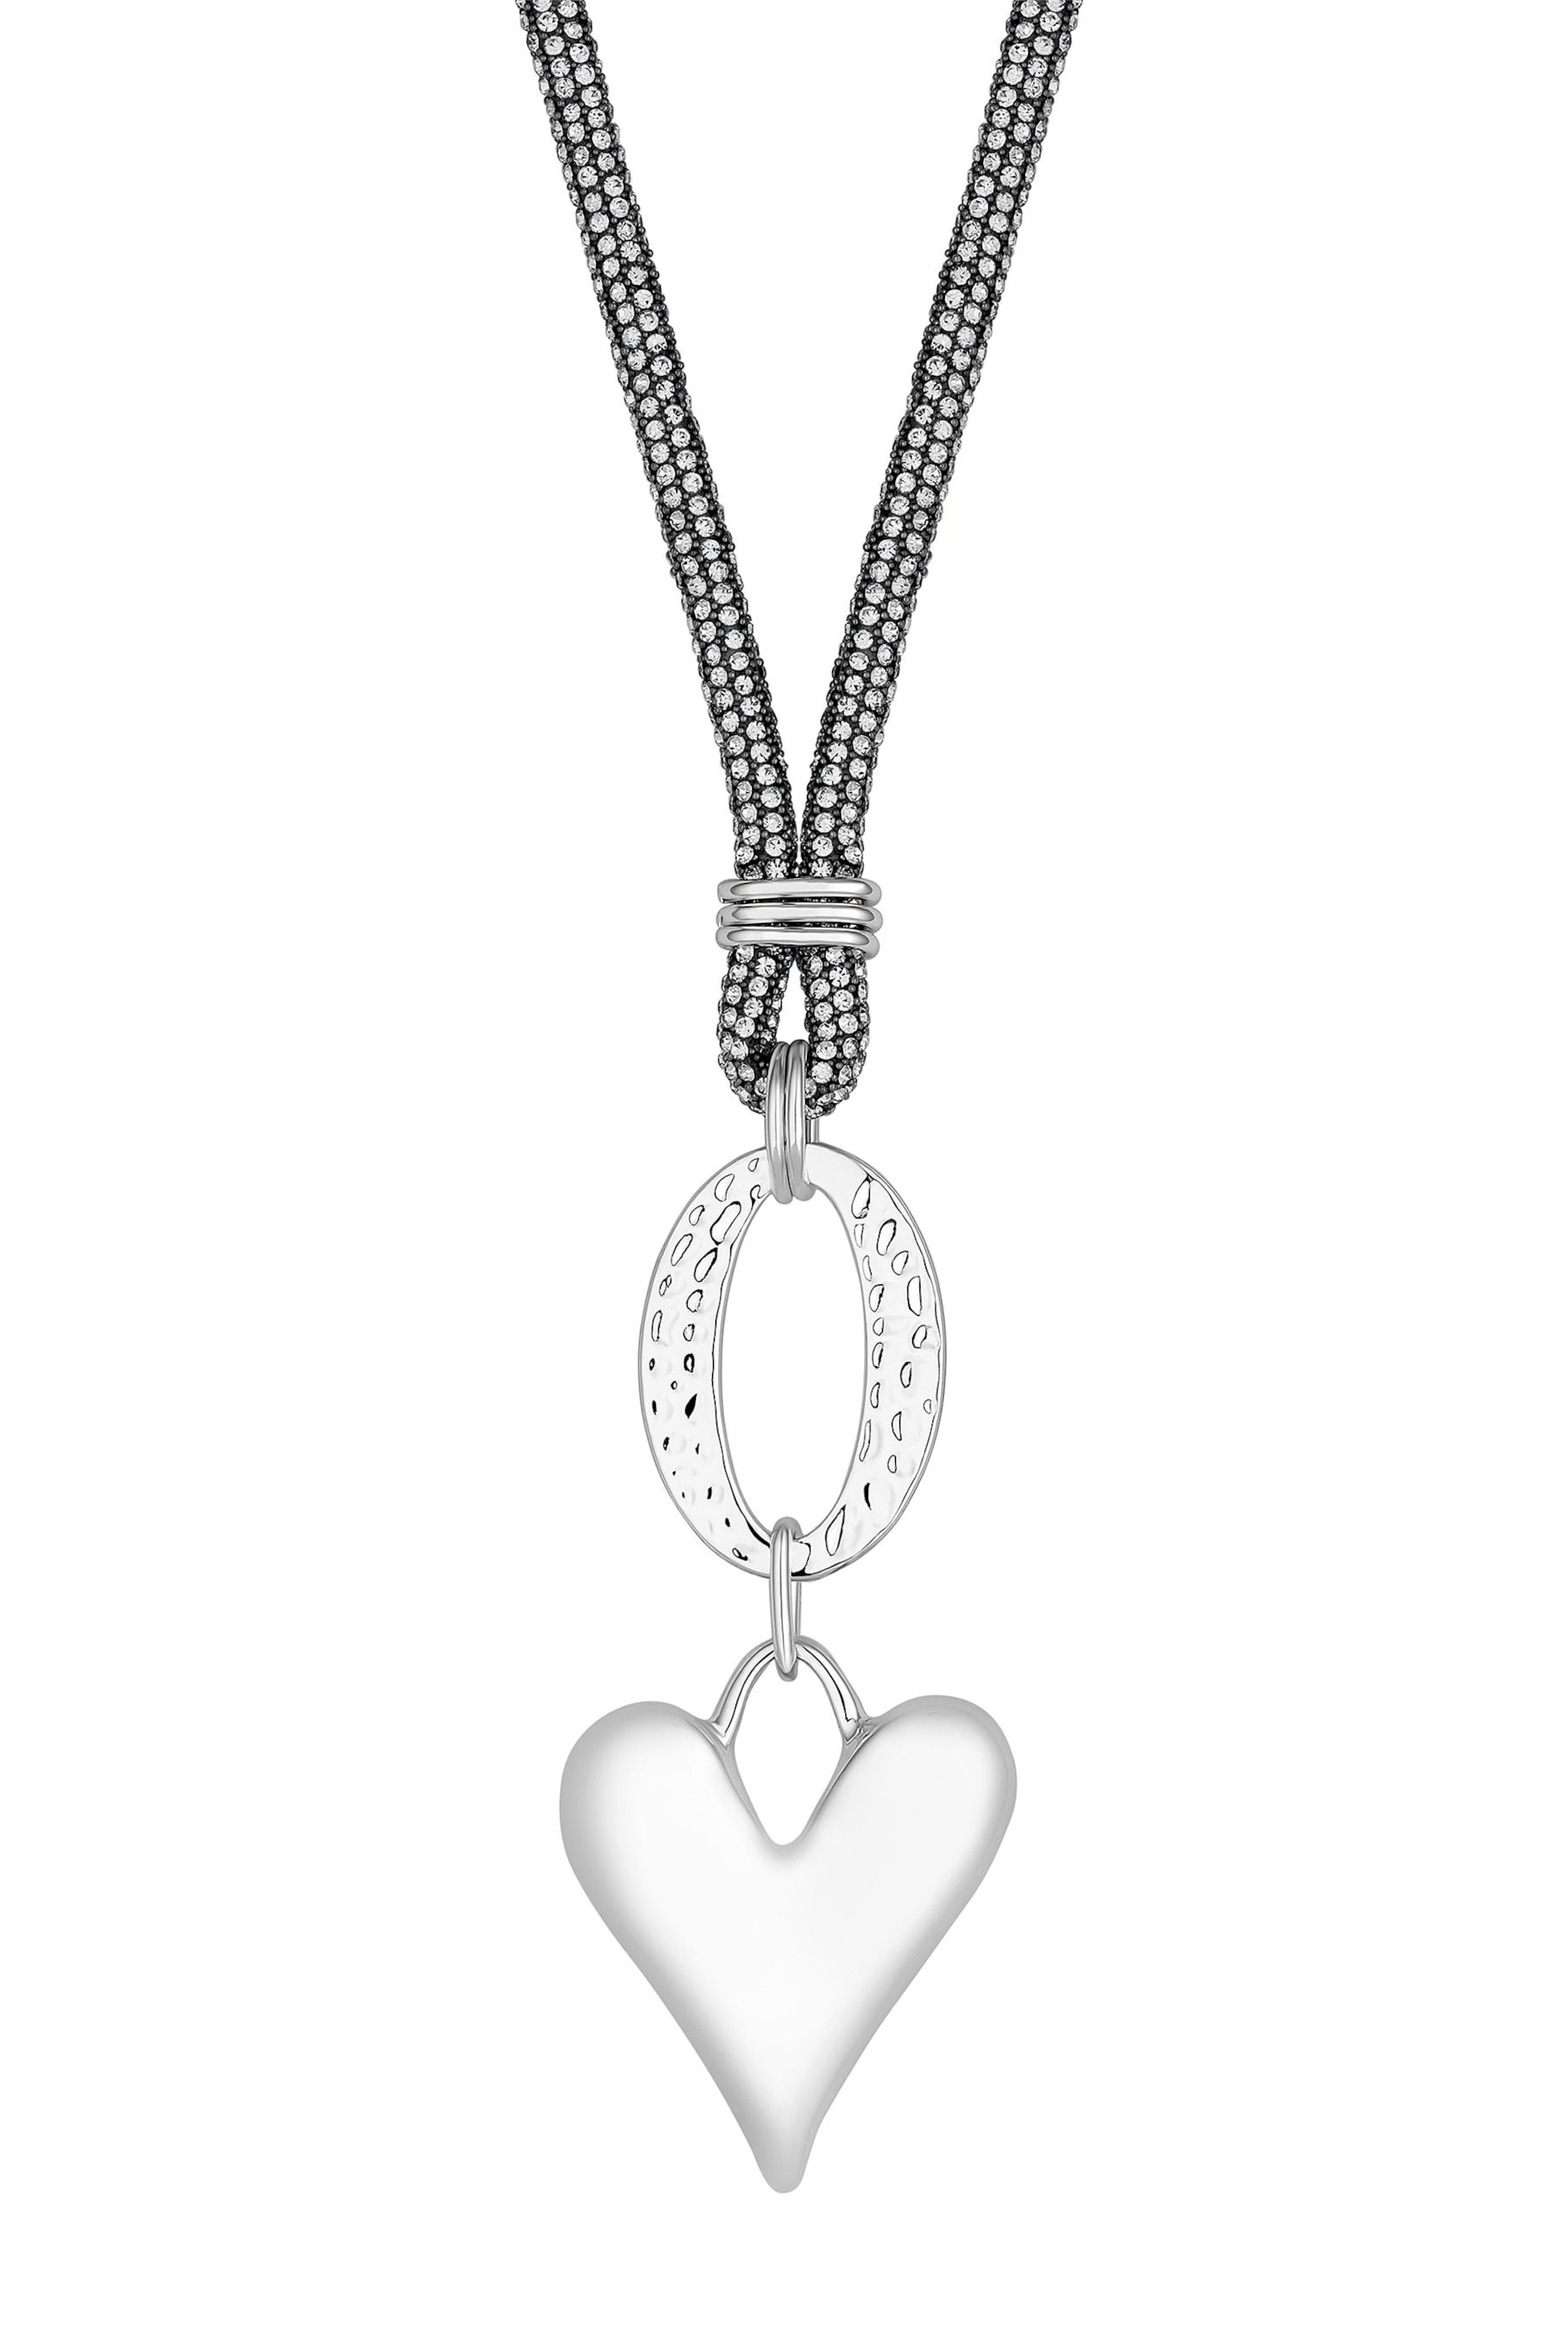 Mood Light Silver Polished Heart Mesh Chain Long Pendant Necklace - Image 1 of 2